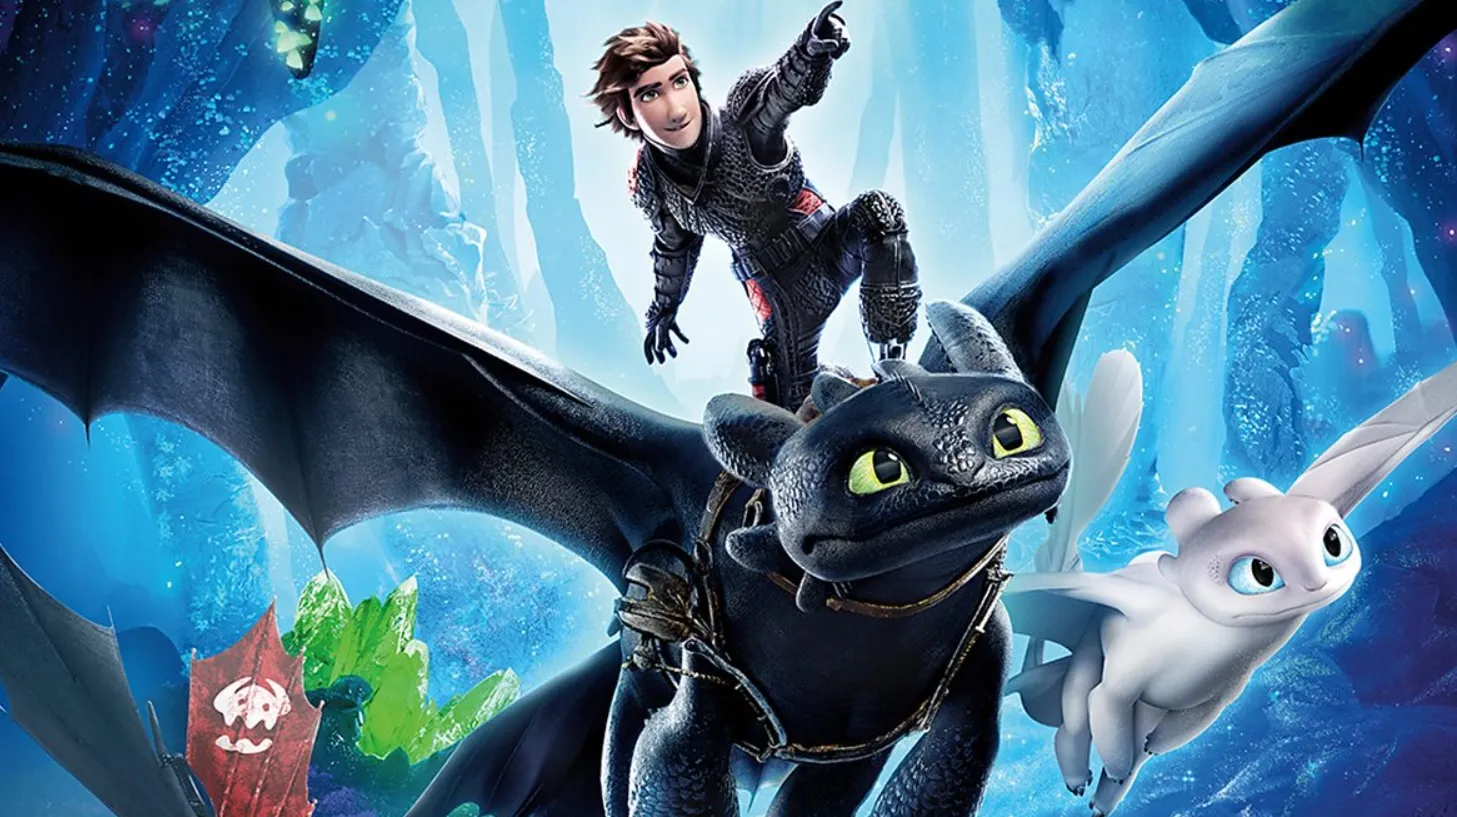 Where to watch how to train your Dragon 3